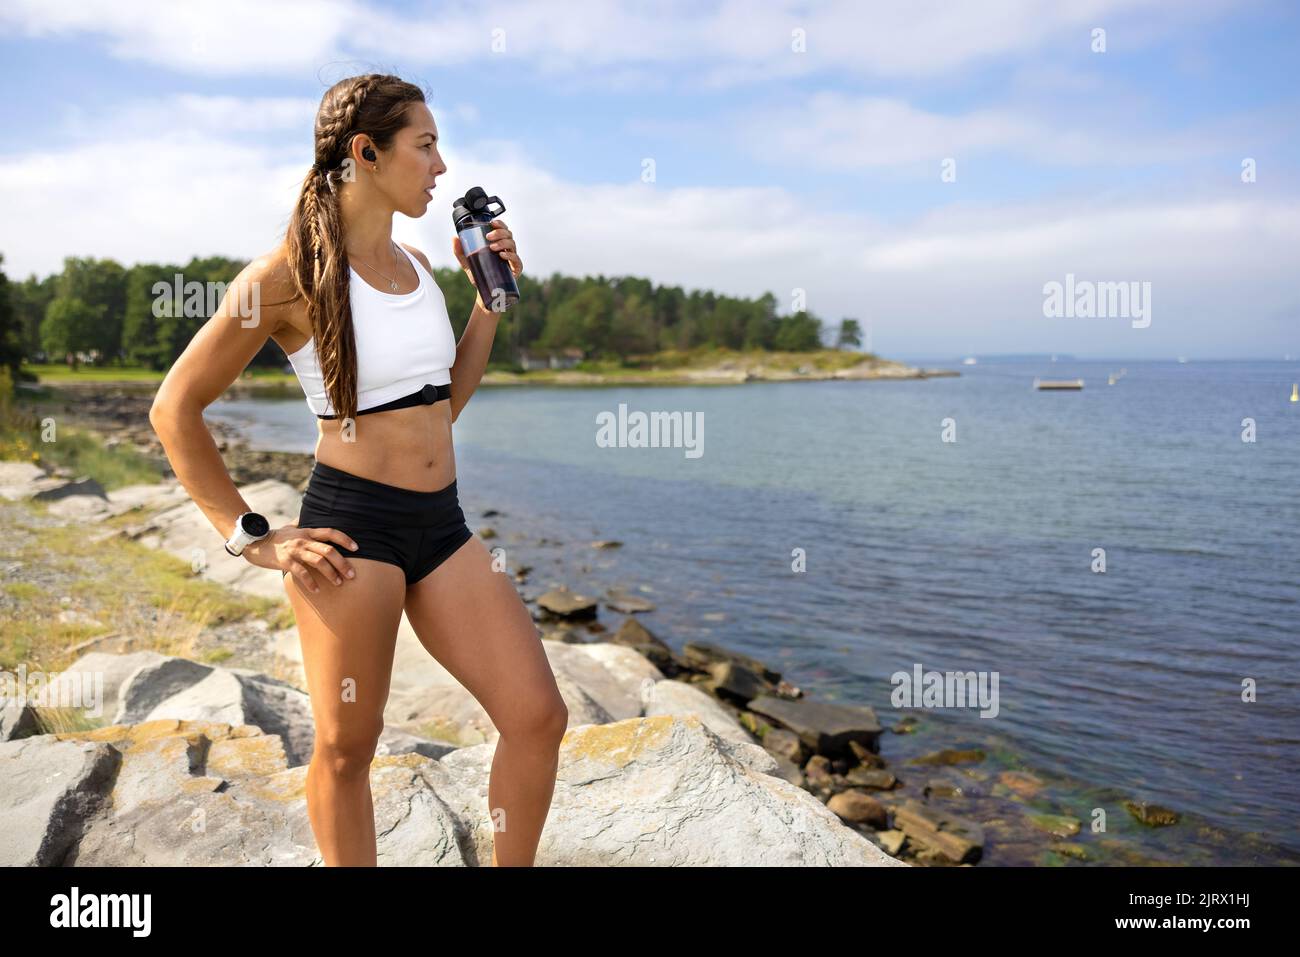 Athlete With Hand On Hip Drinking Water During Workout Stock Photo